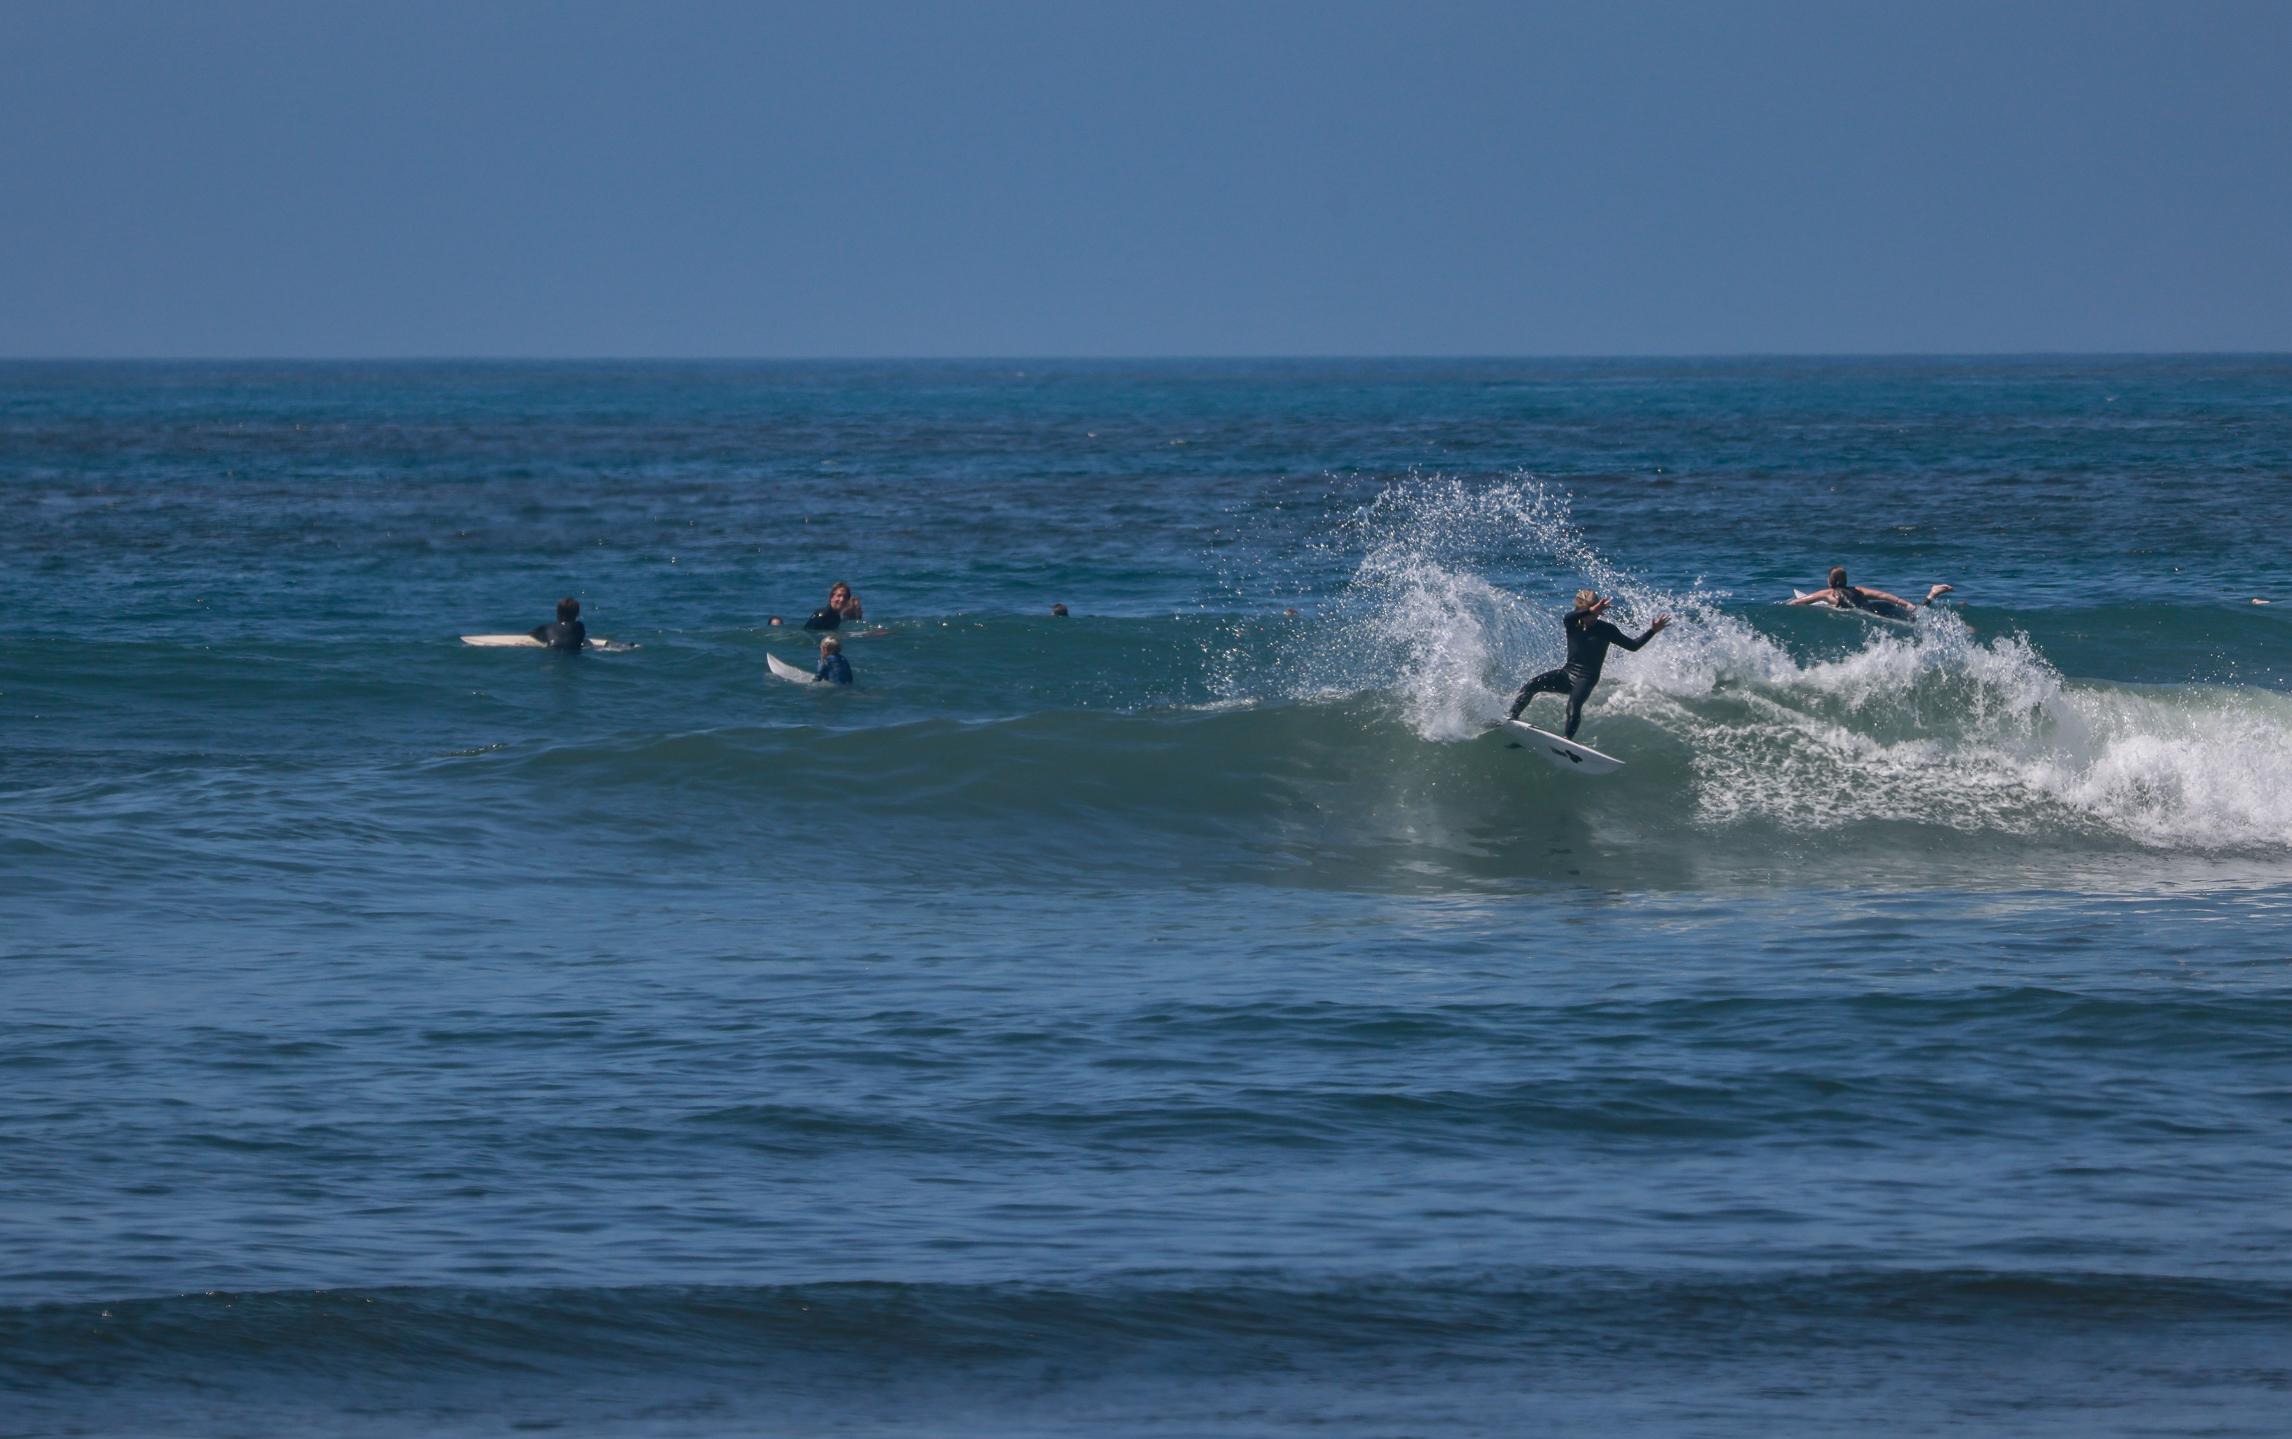 ‘Aggressive’ Shark Behavior Forces Restriction of Ocean Access at San Clemente